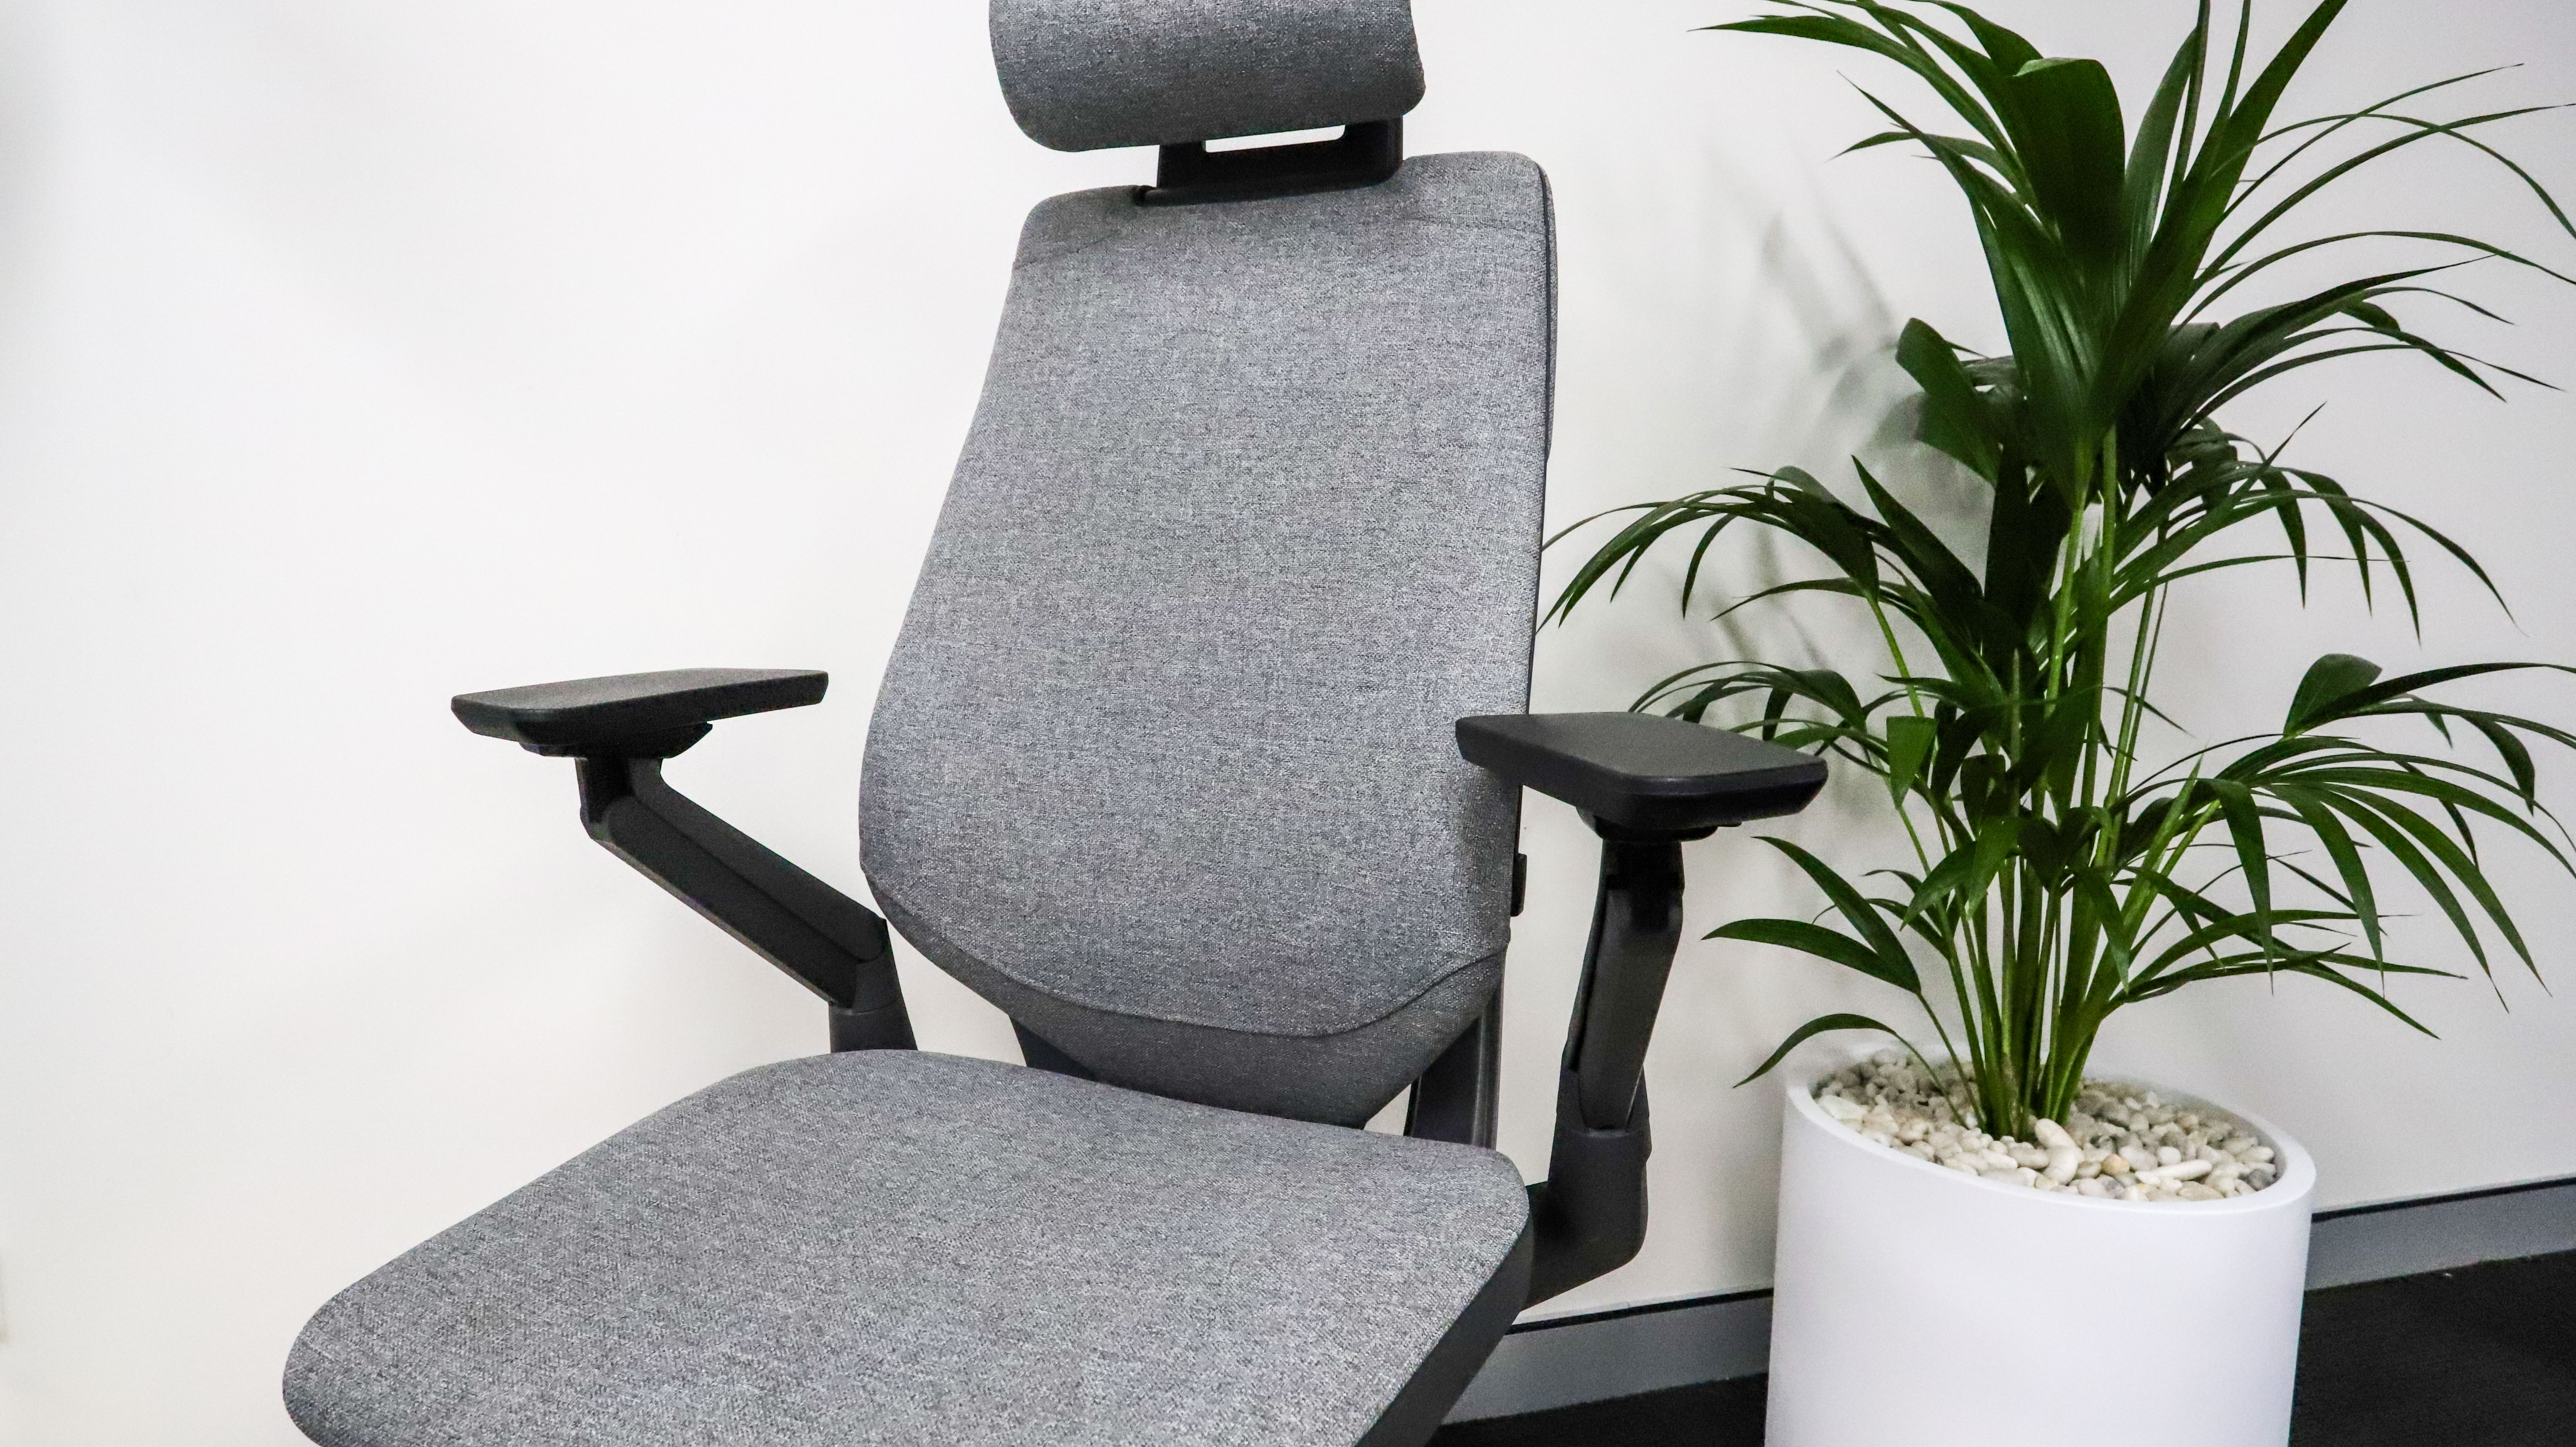 The adjustable armrests of the Steelcase Gesture